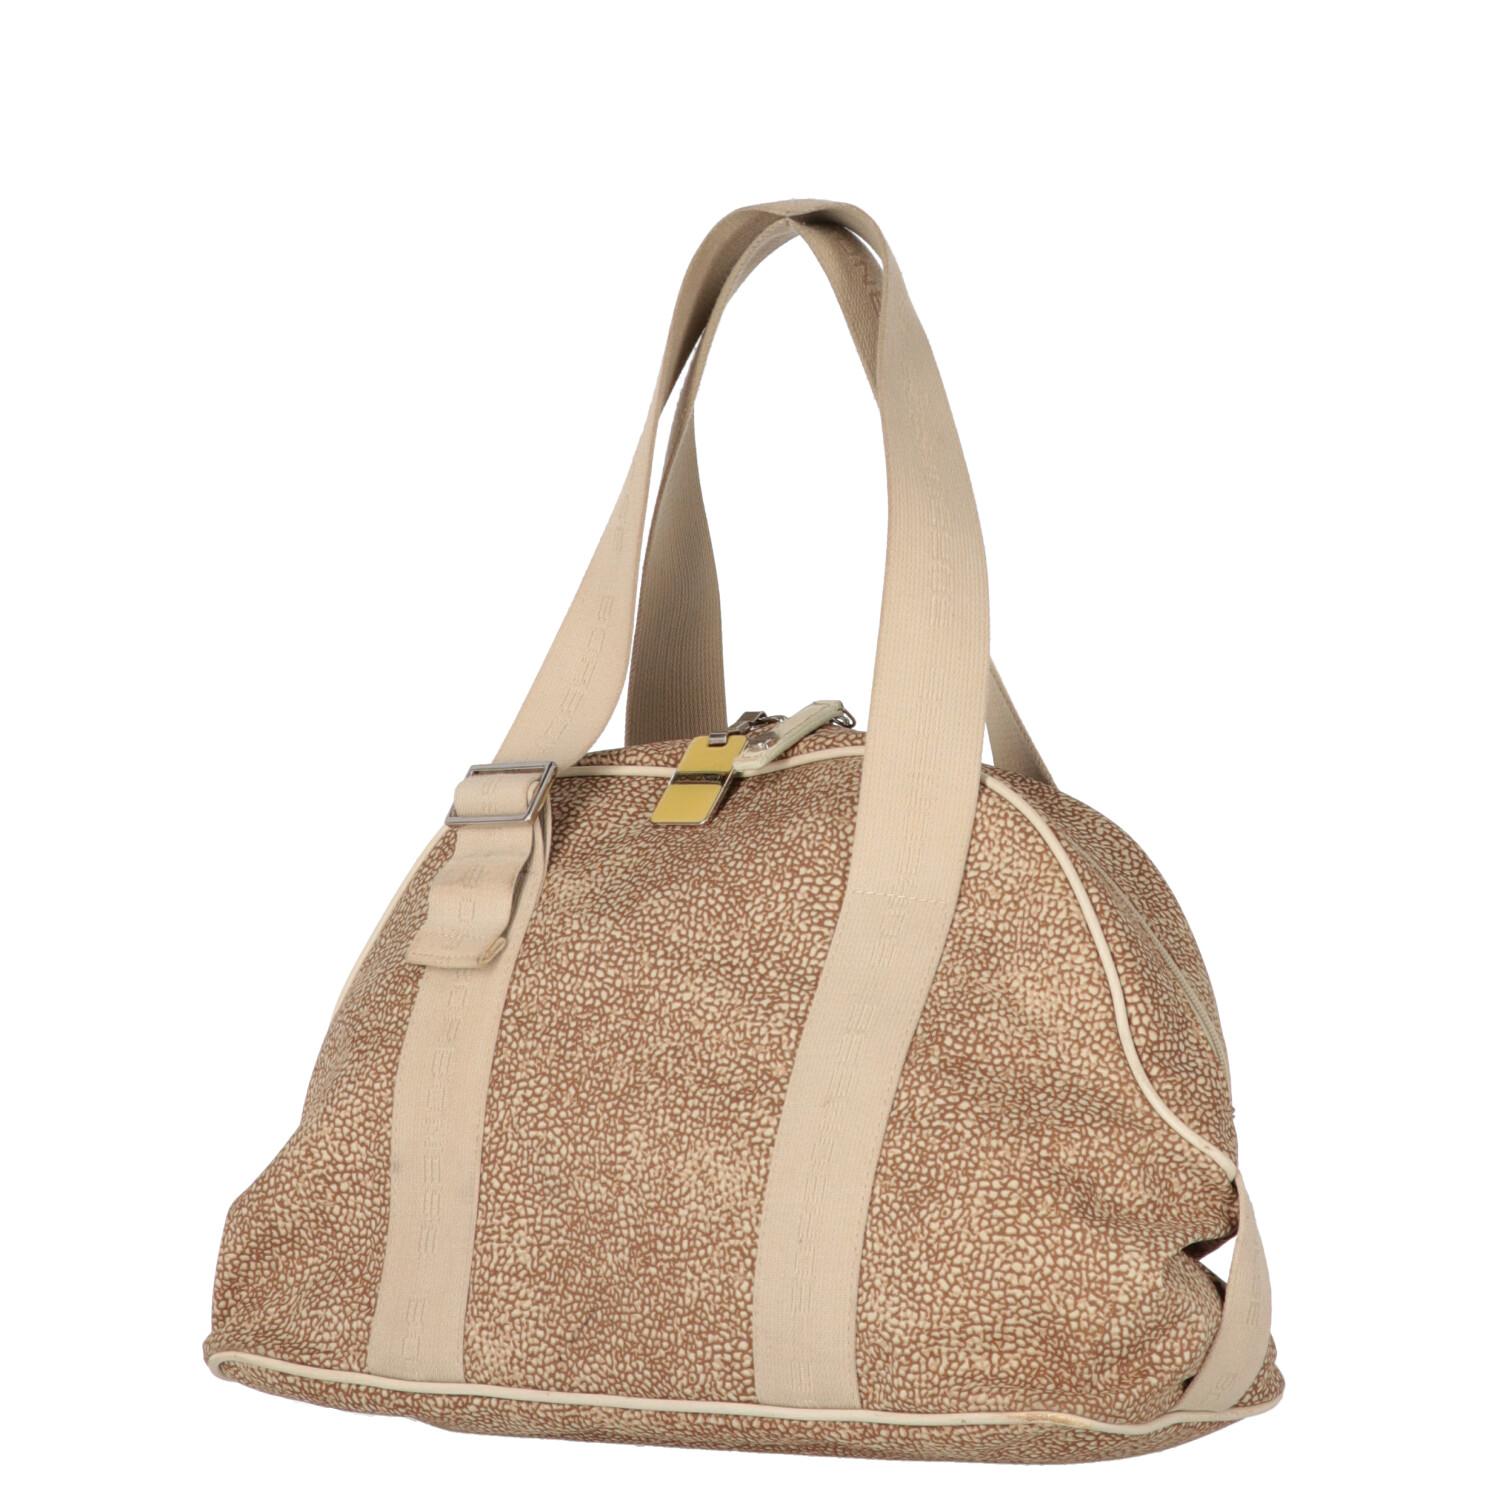 A.N.G.E.L.O. Vintage - ITALY
Borbonese beige fabric with jet op print half-moon bag and edges finished in leather. Logoed cotton ribbon handles with self-locking buckle, double-slider zip closure.

The product shows slight signs of wear on the edges